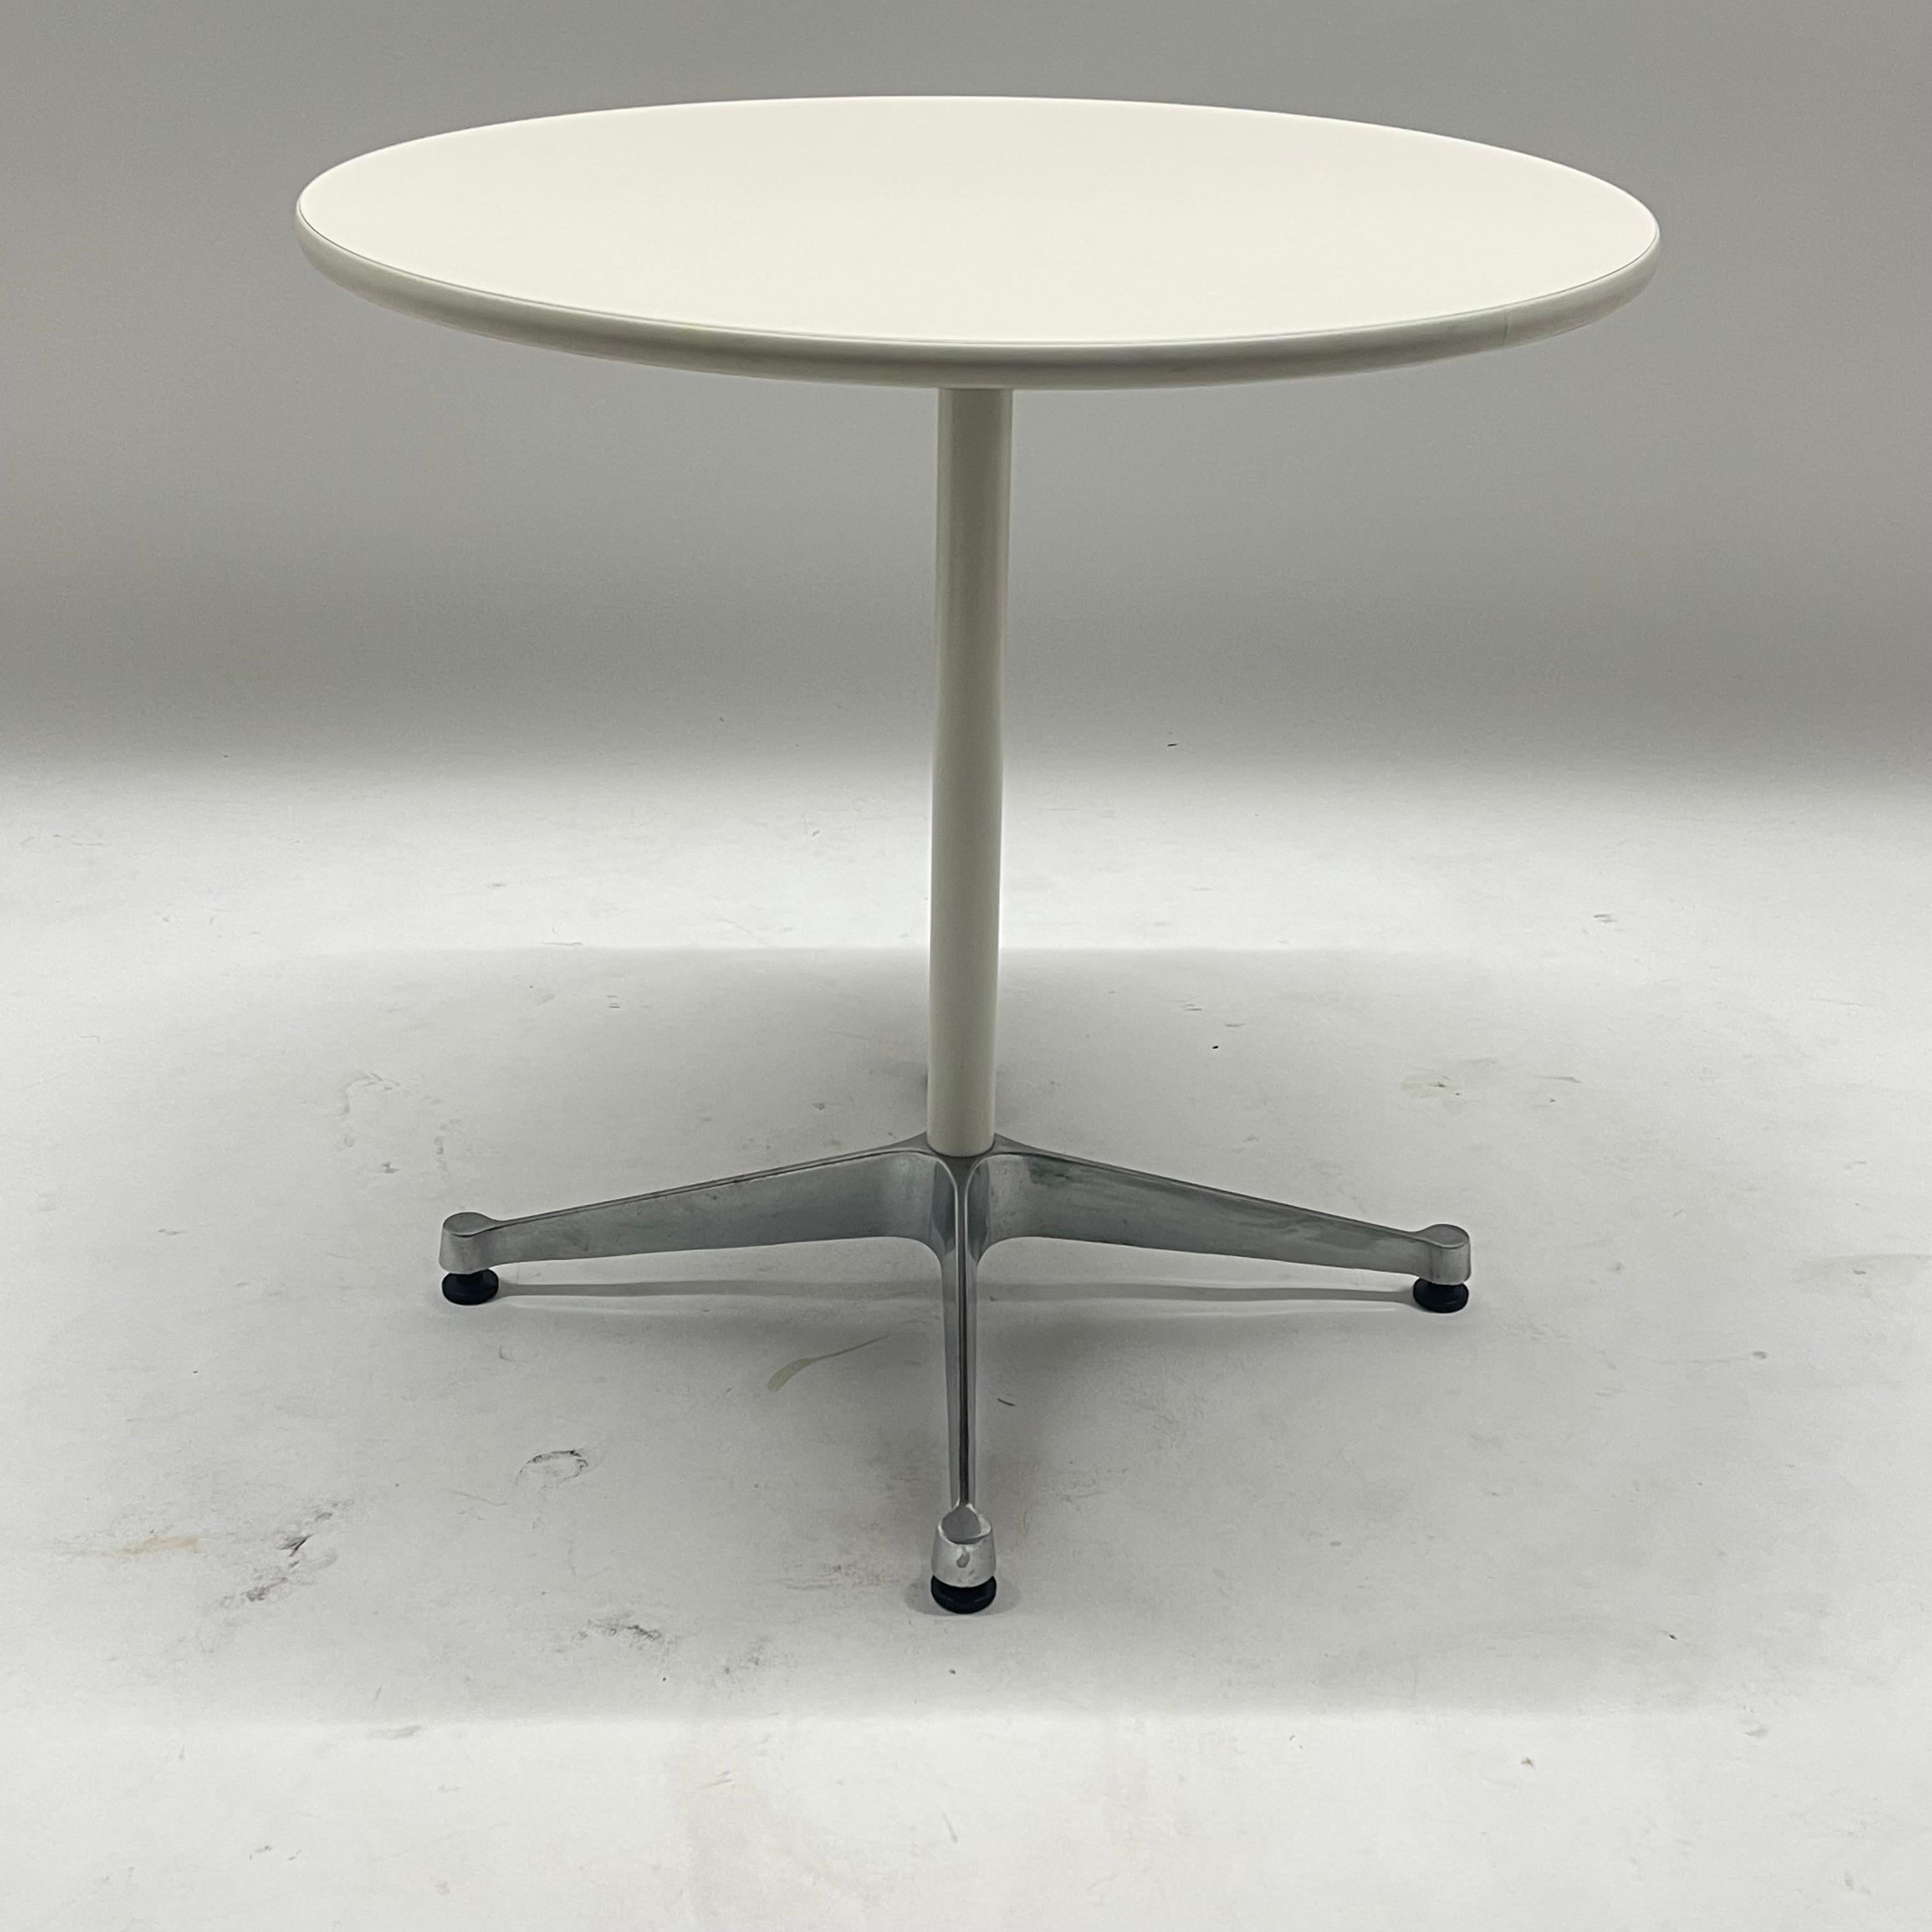 Contemporary Eames office dining, bistro, side, or end table. Rendered in durable white laminate wood top with a two tone aluminum and white powder coated base. This table has an extremely versatile size. By Eames for Herman Miller, USA, circa 2000s.